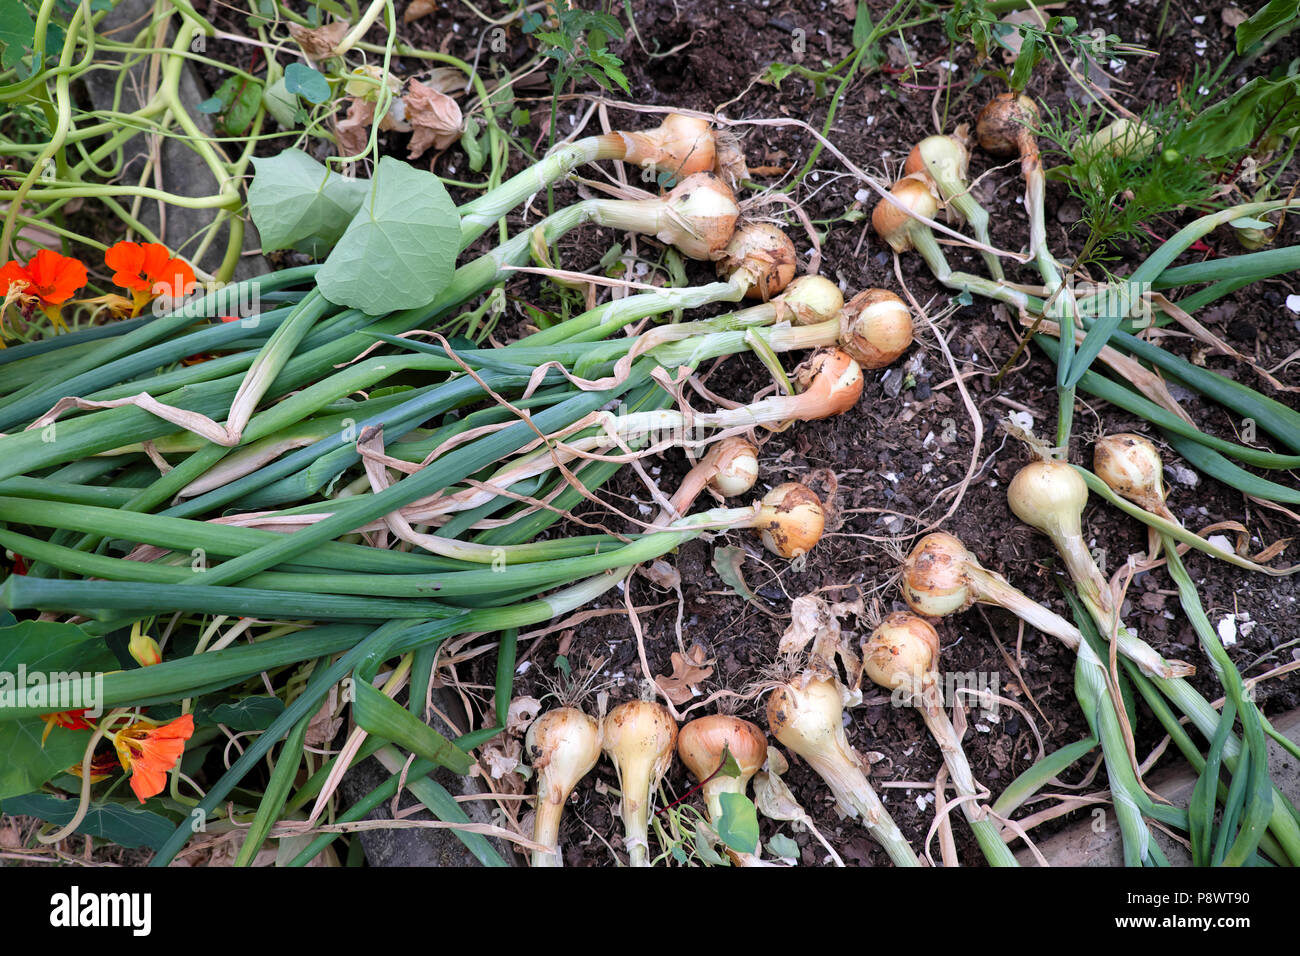 Onions growing in a small garden pulled for drying on the ground outside in the sun in July 2018 Carmarthenshire Wales UK Great Britain  KATHY DEWITT Stock Photo